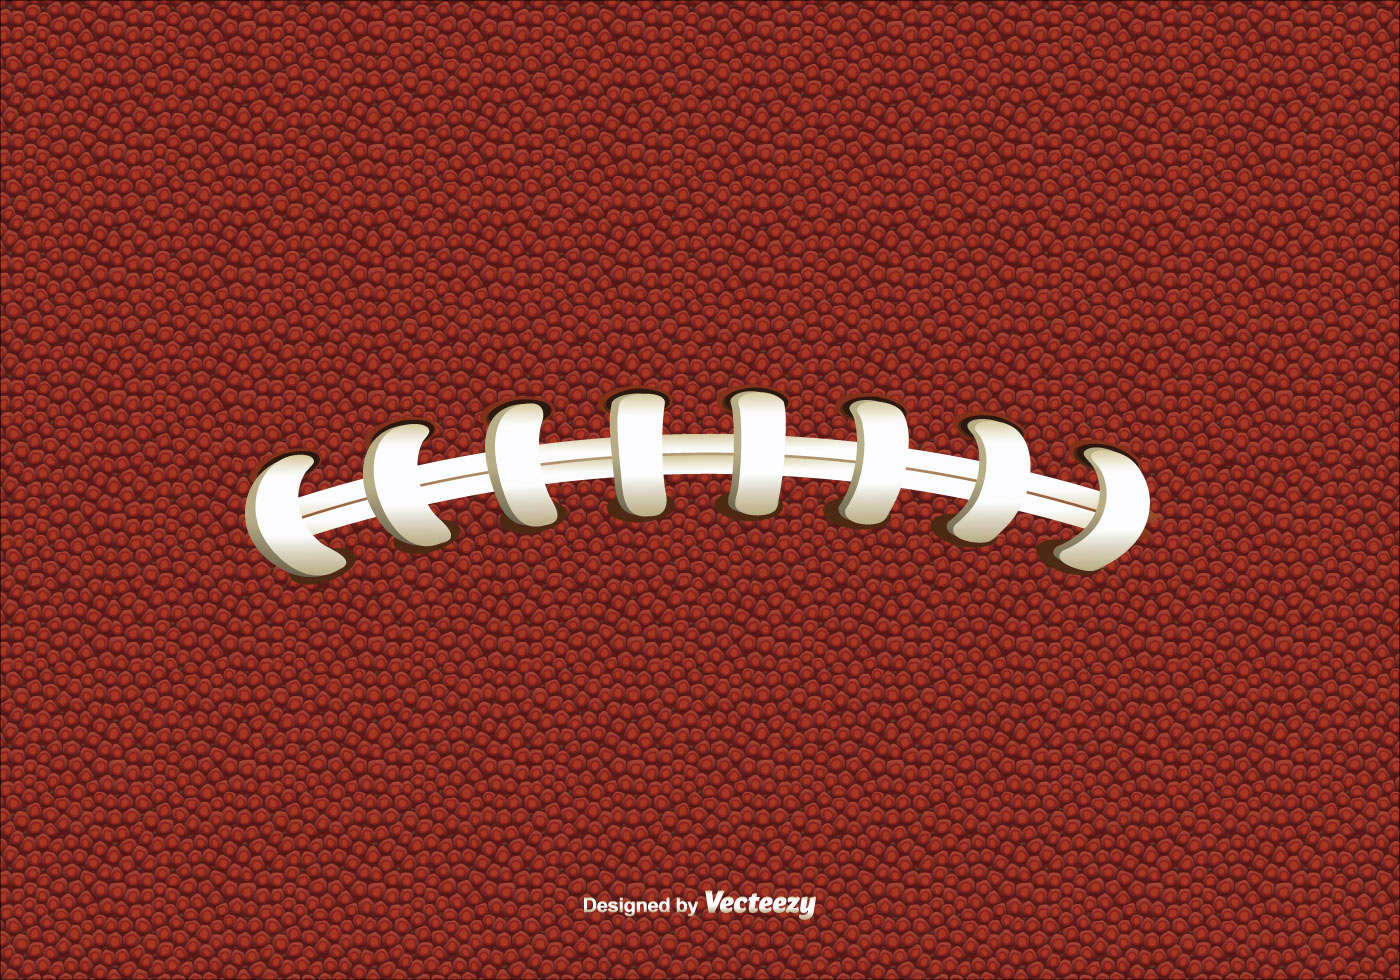 Football Texture and Lace  Download Free Vector Art, Stock Graphics 